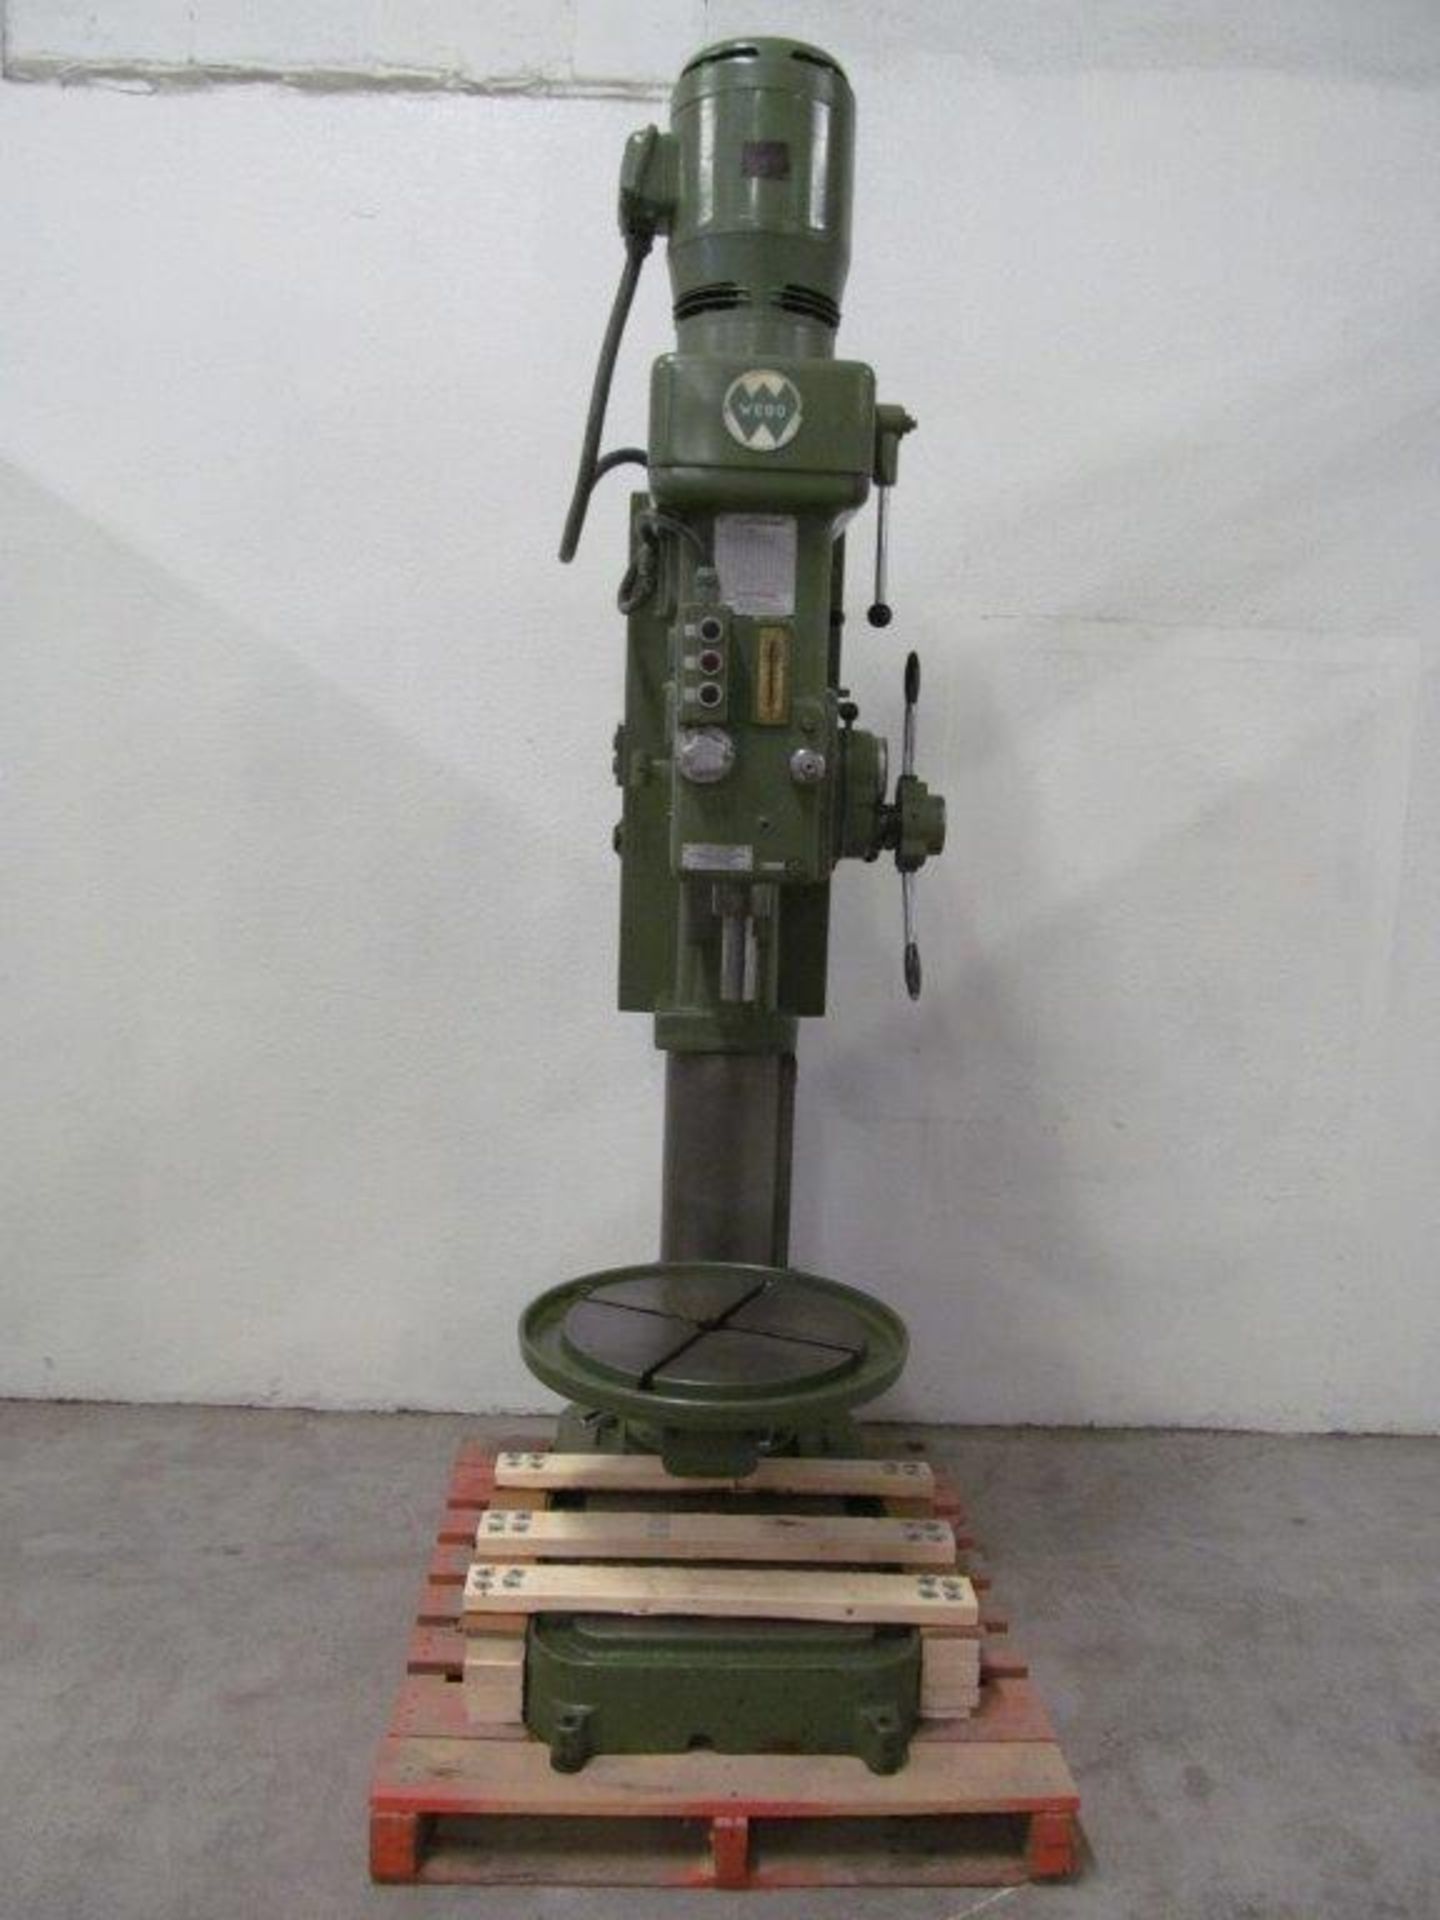 WEBO (GERMANY) HEAVY DUTY GEARED HEAD DRILL PRESS MT4 SPINDLE 1 9/16'' DRILLING CAPACITY, ELECTRICS: - Image 9 of 9